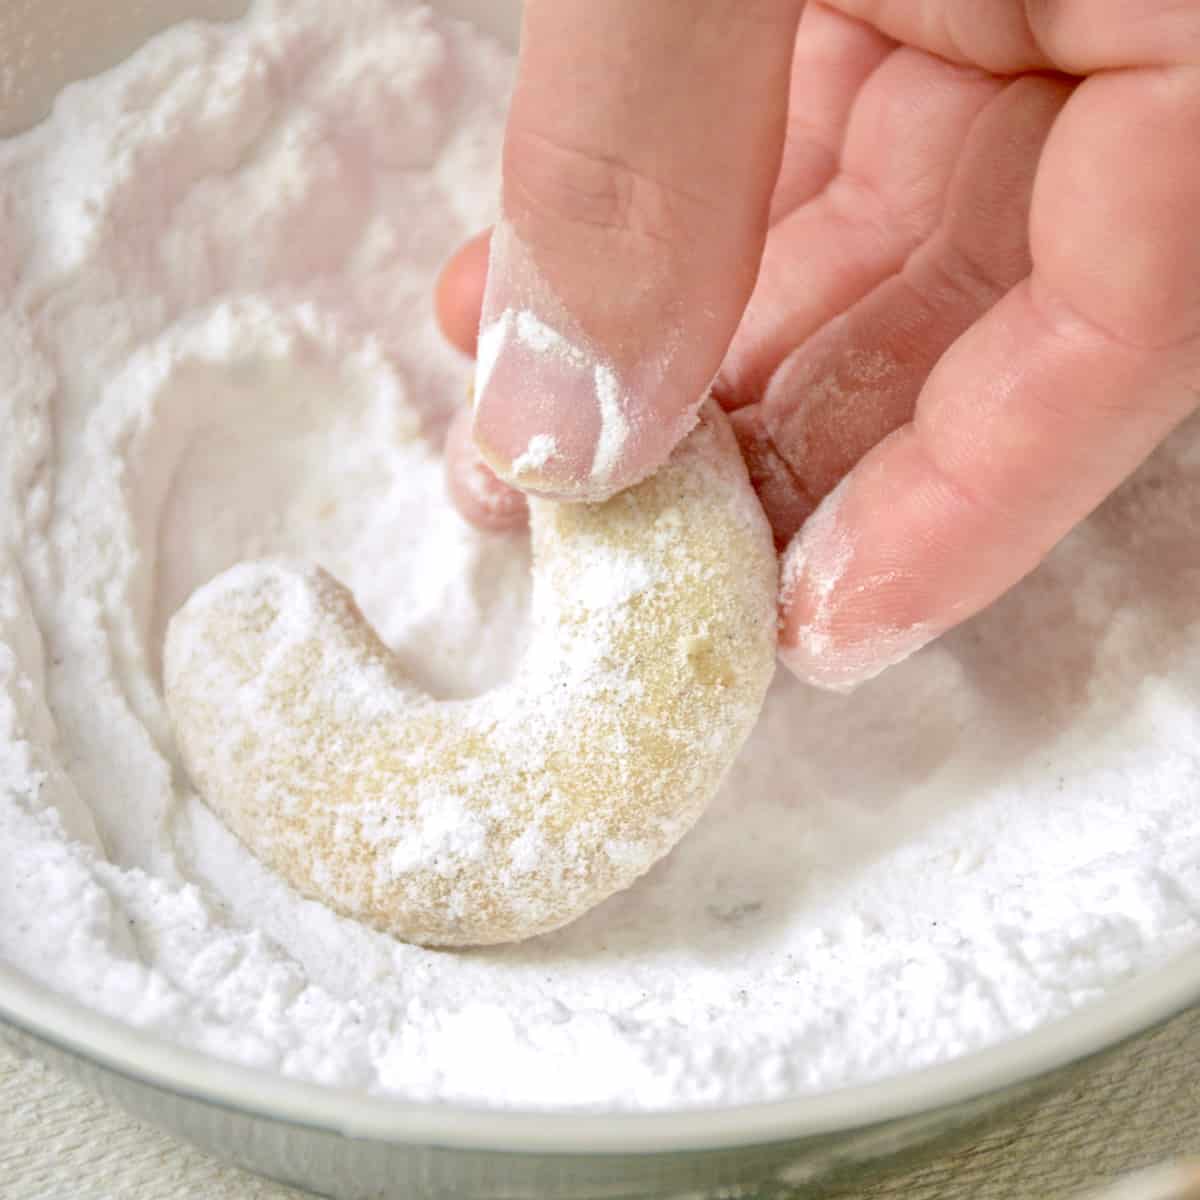 A crescent cookie is dipped into a bowl of powdered vanilla sugar to completely coat it.